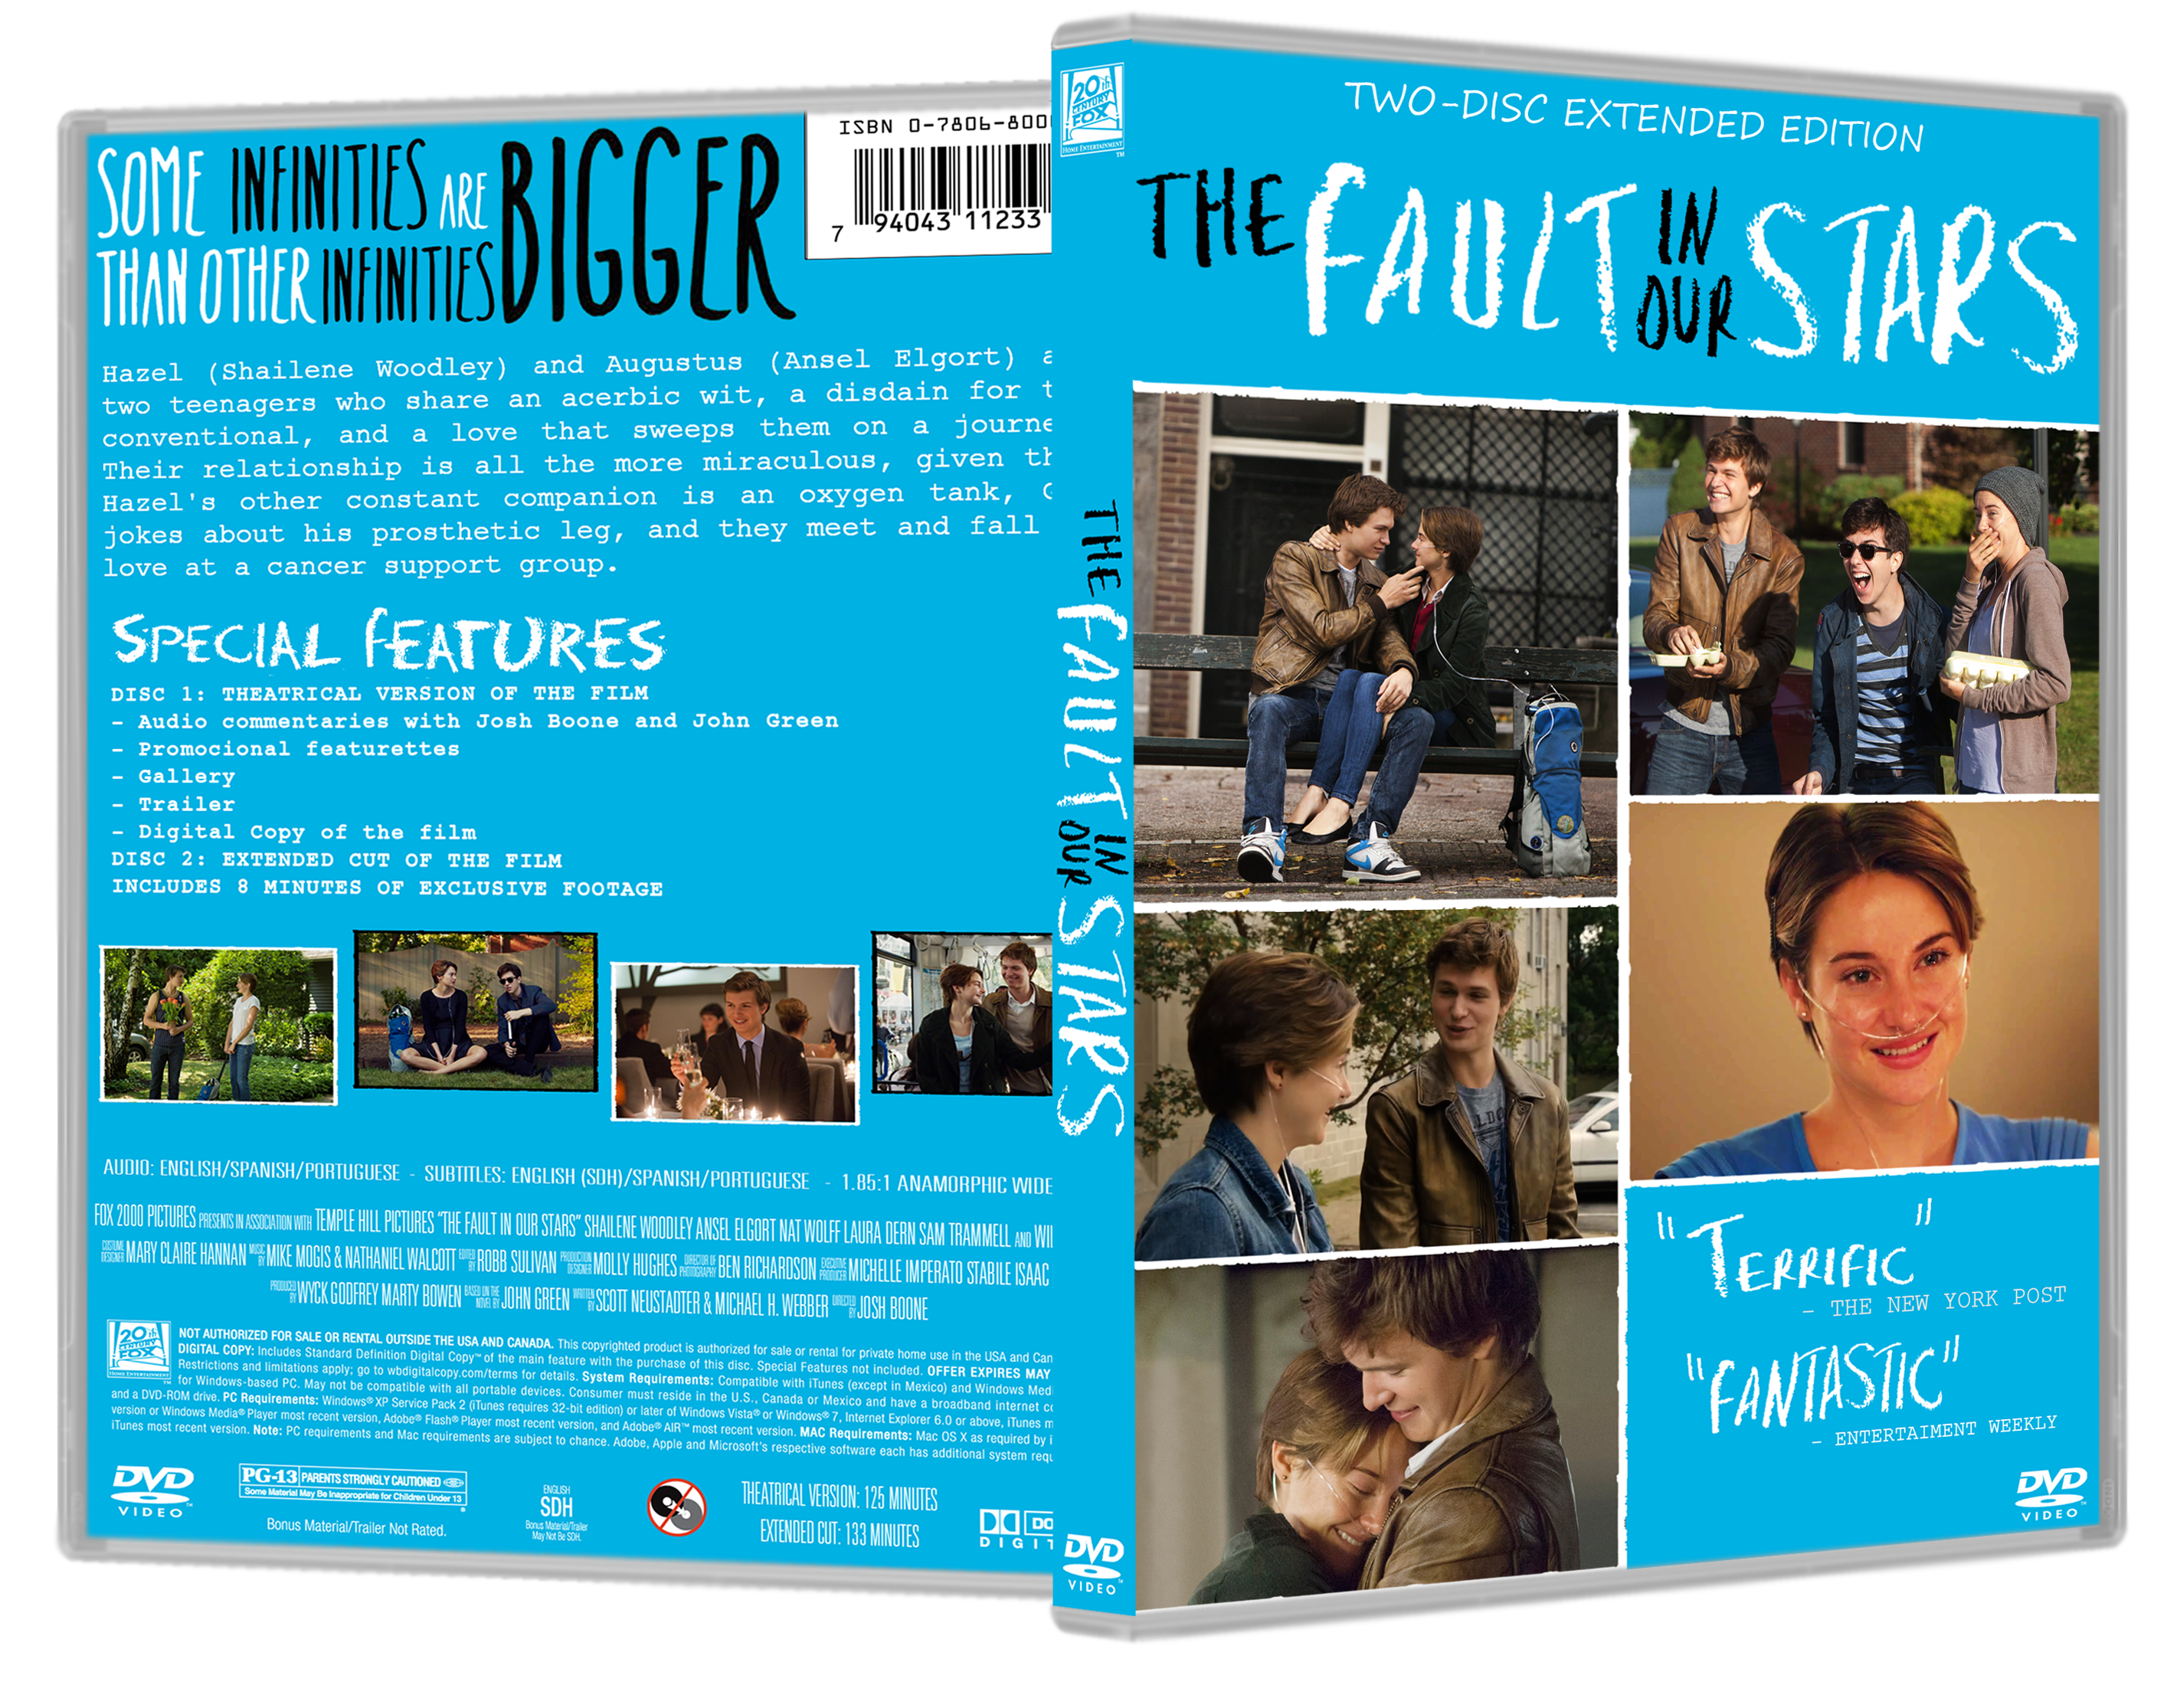 The Fault in Our Stars box cover